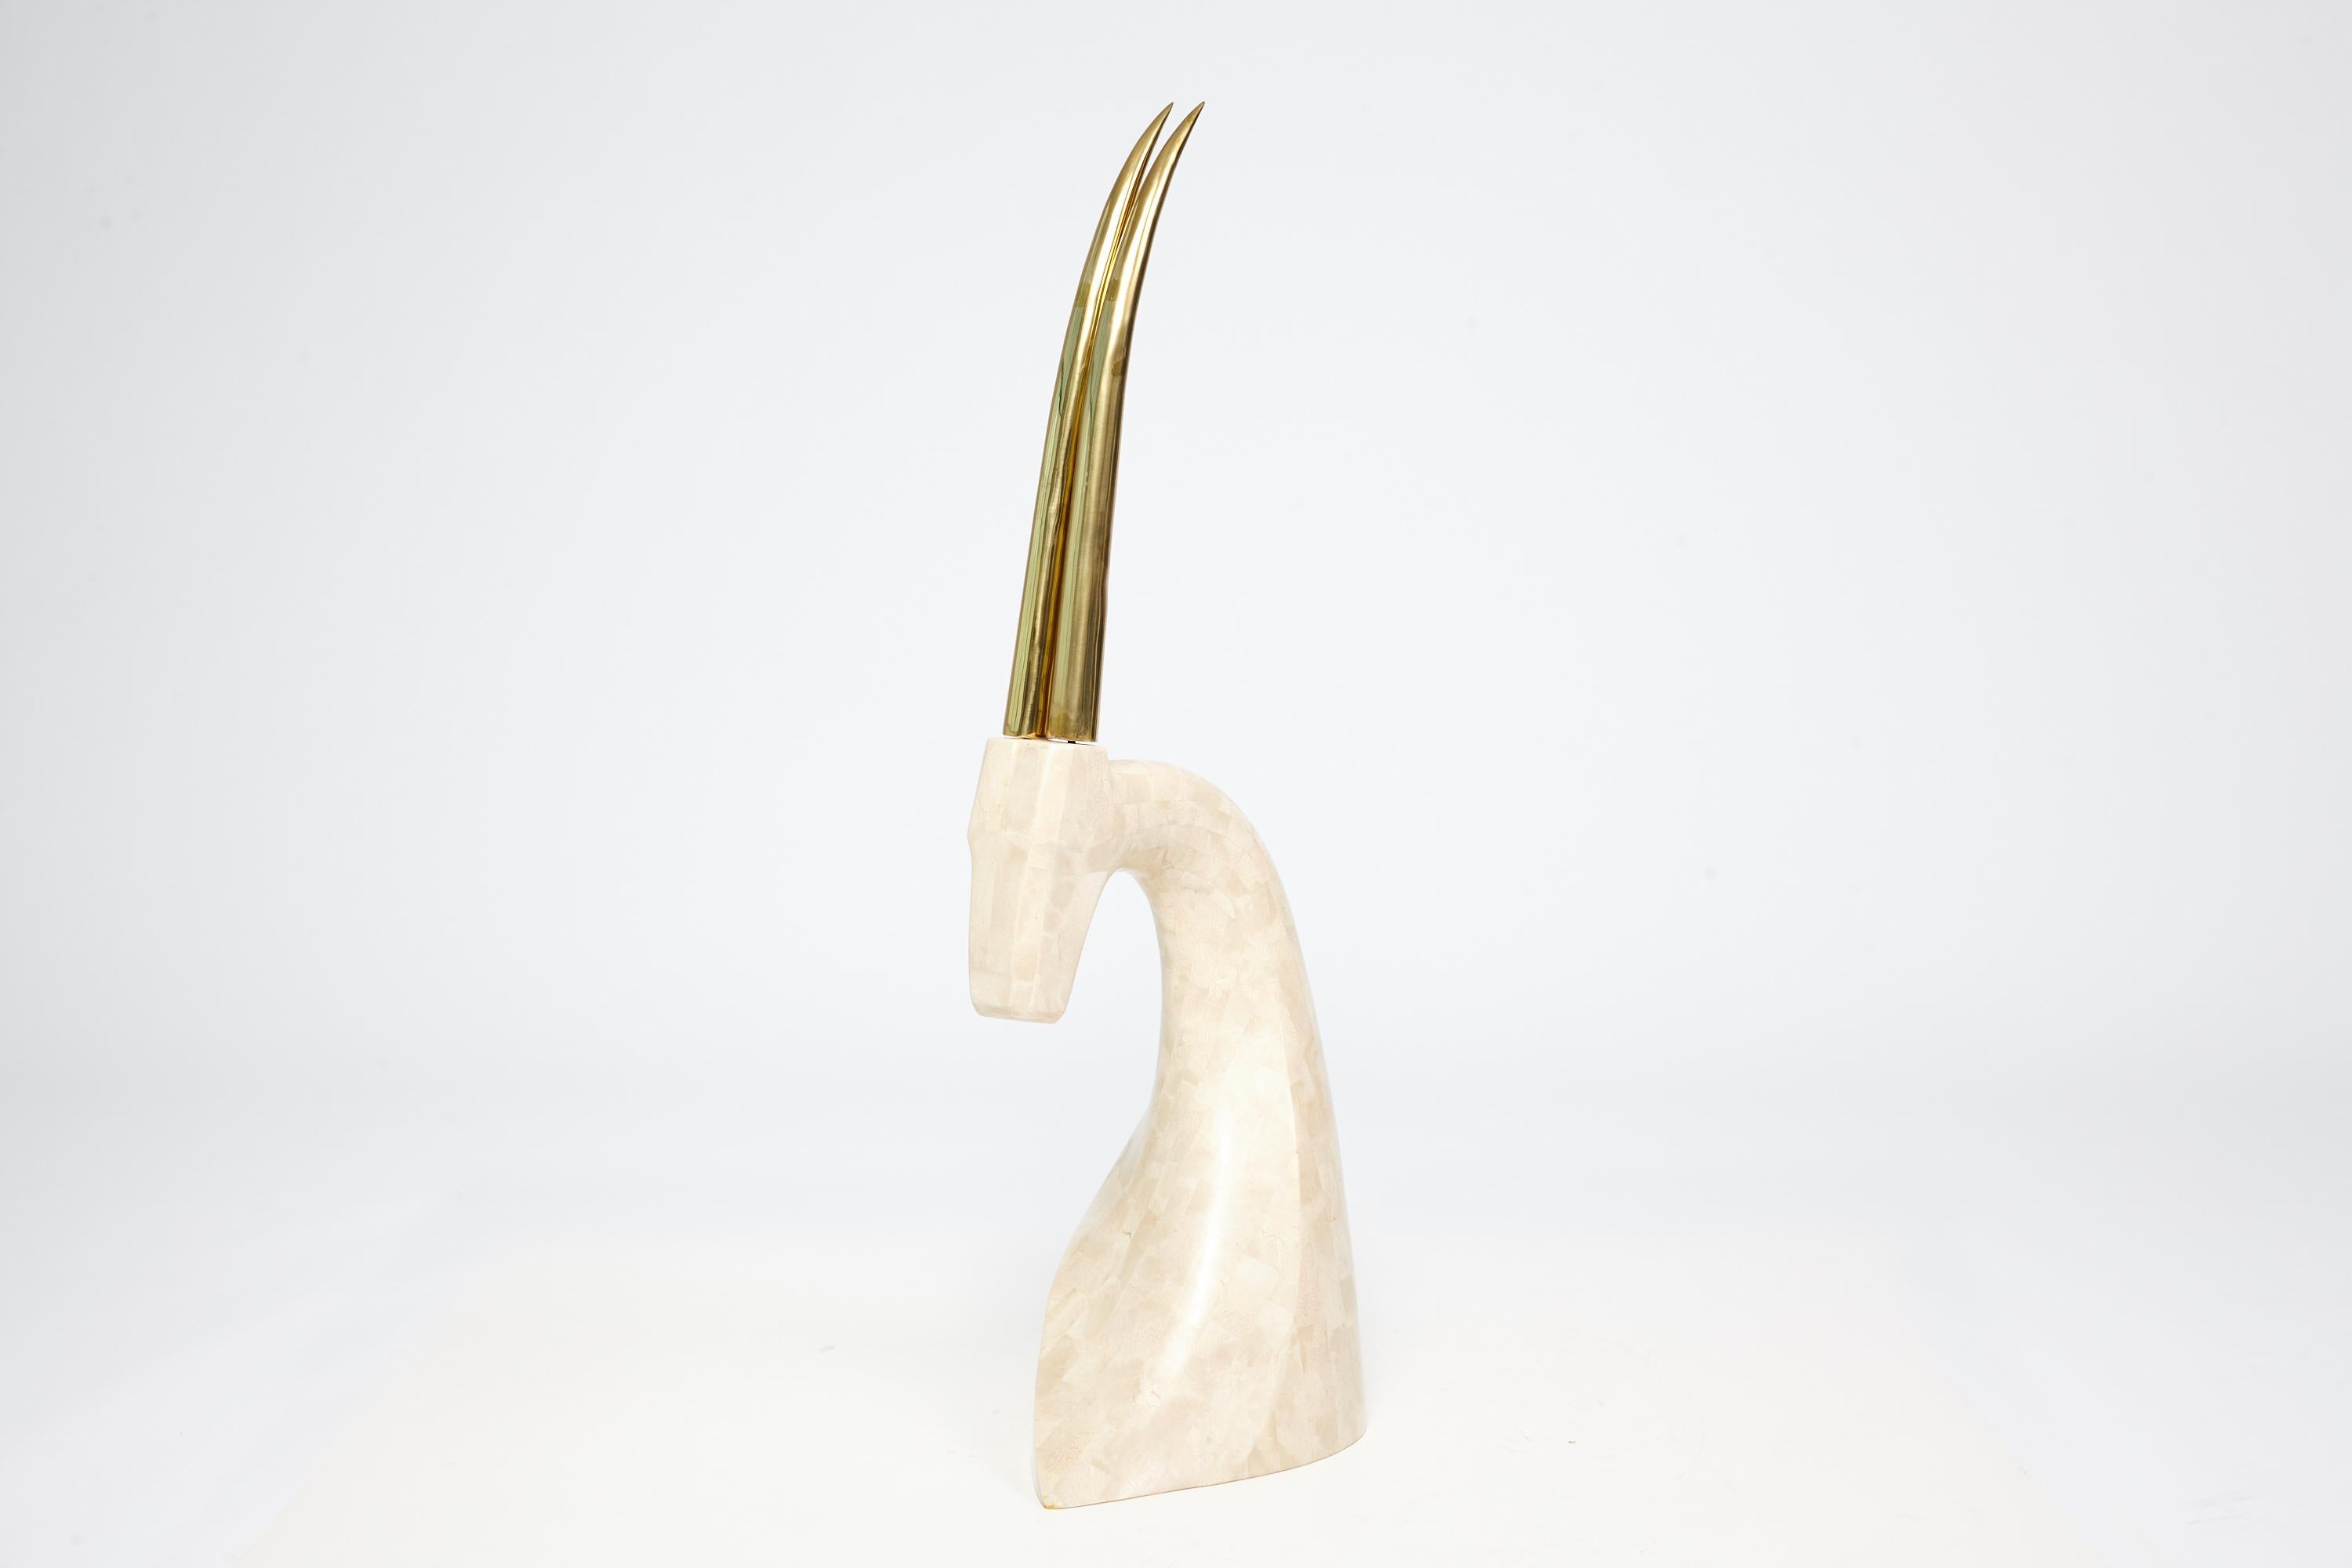 Sexy, sleek and chic. Mid Century Modern sculpture - possible by Maitland Smith - of a Gazelle of tessellated travertine featuring large brass horns. Its large size commands attention making it suitable as a centerpiece. It also pairs as well with